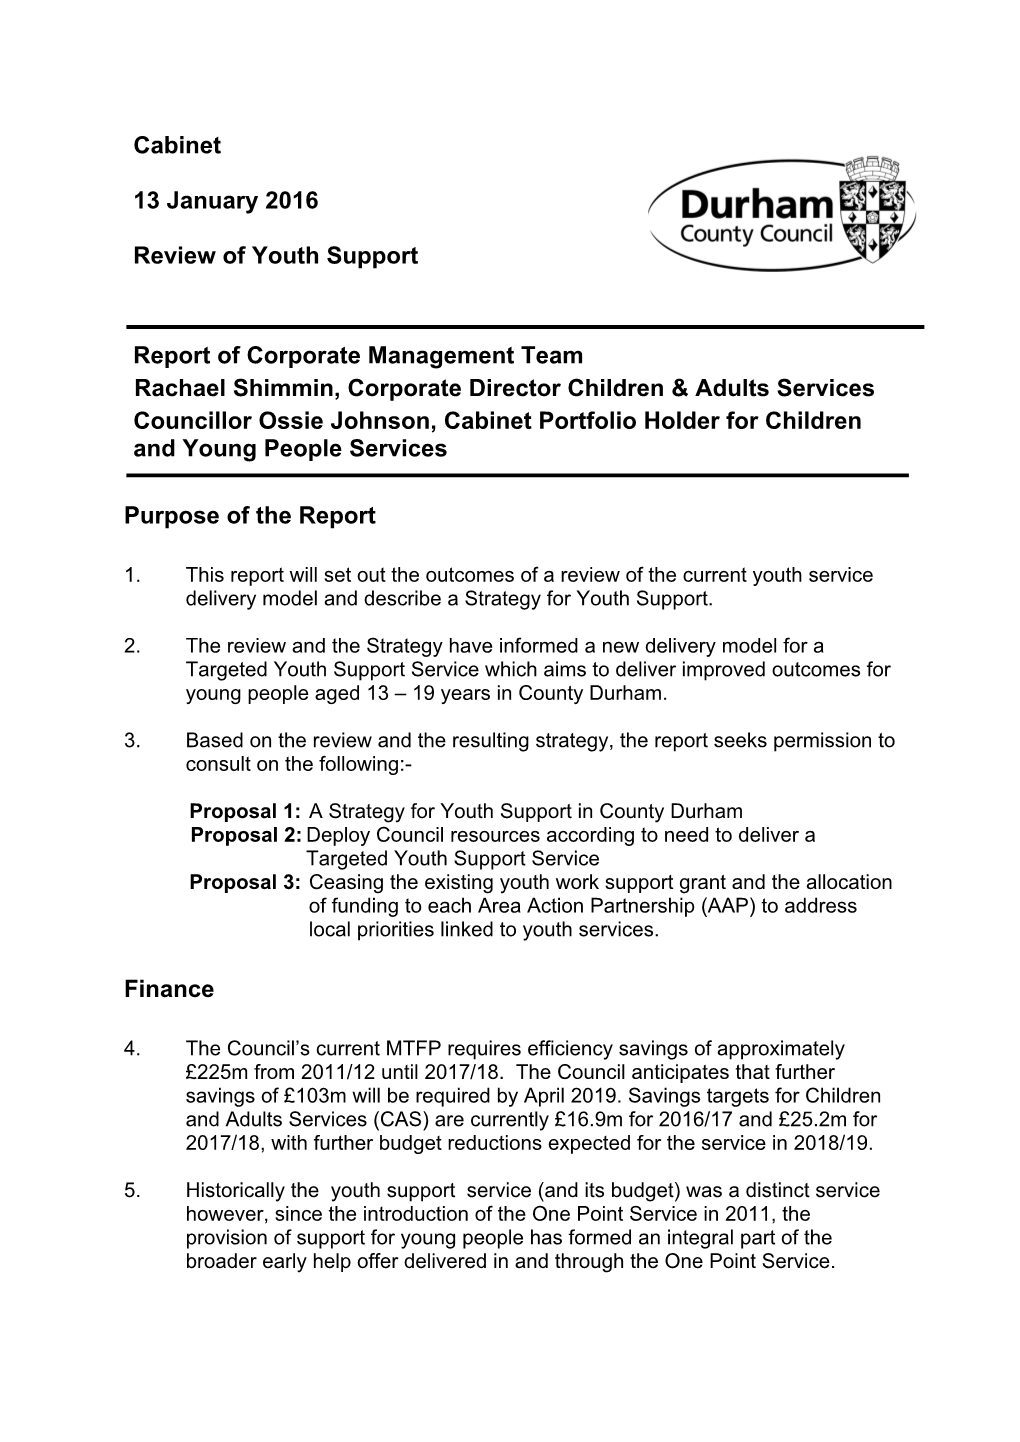 Review of Youth Support